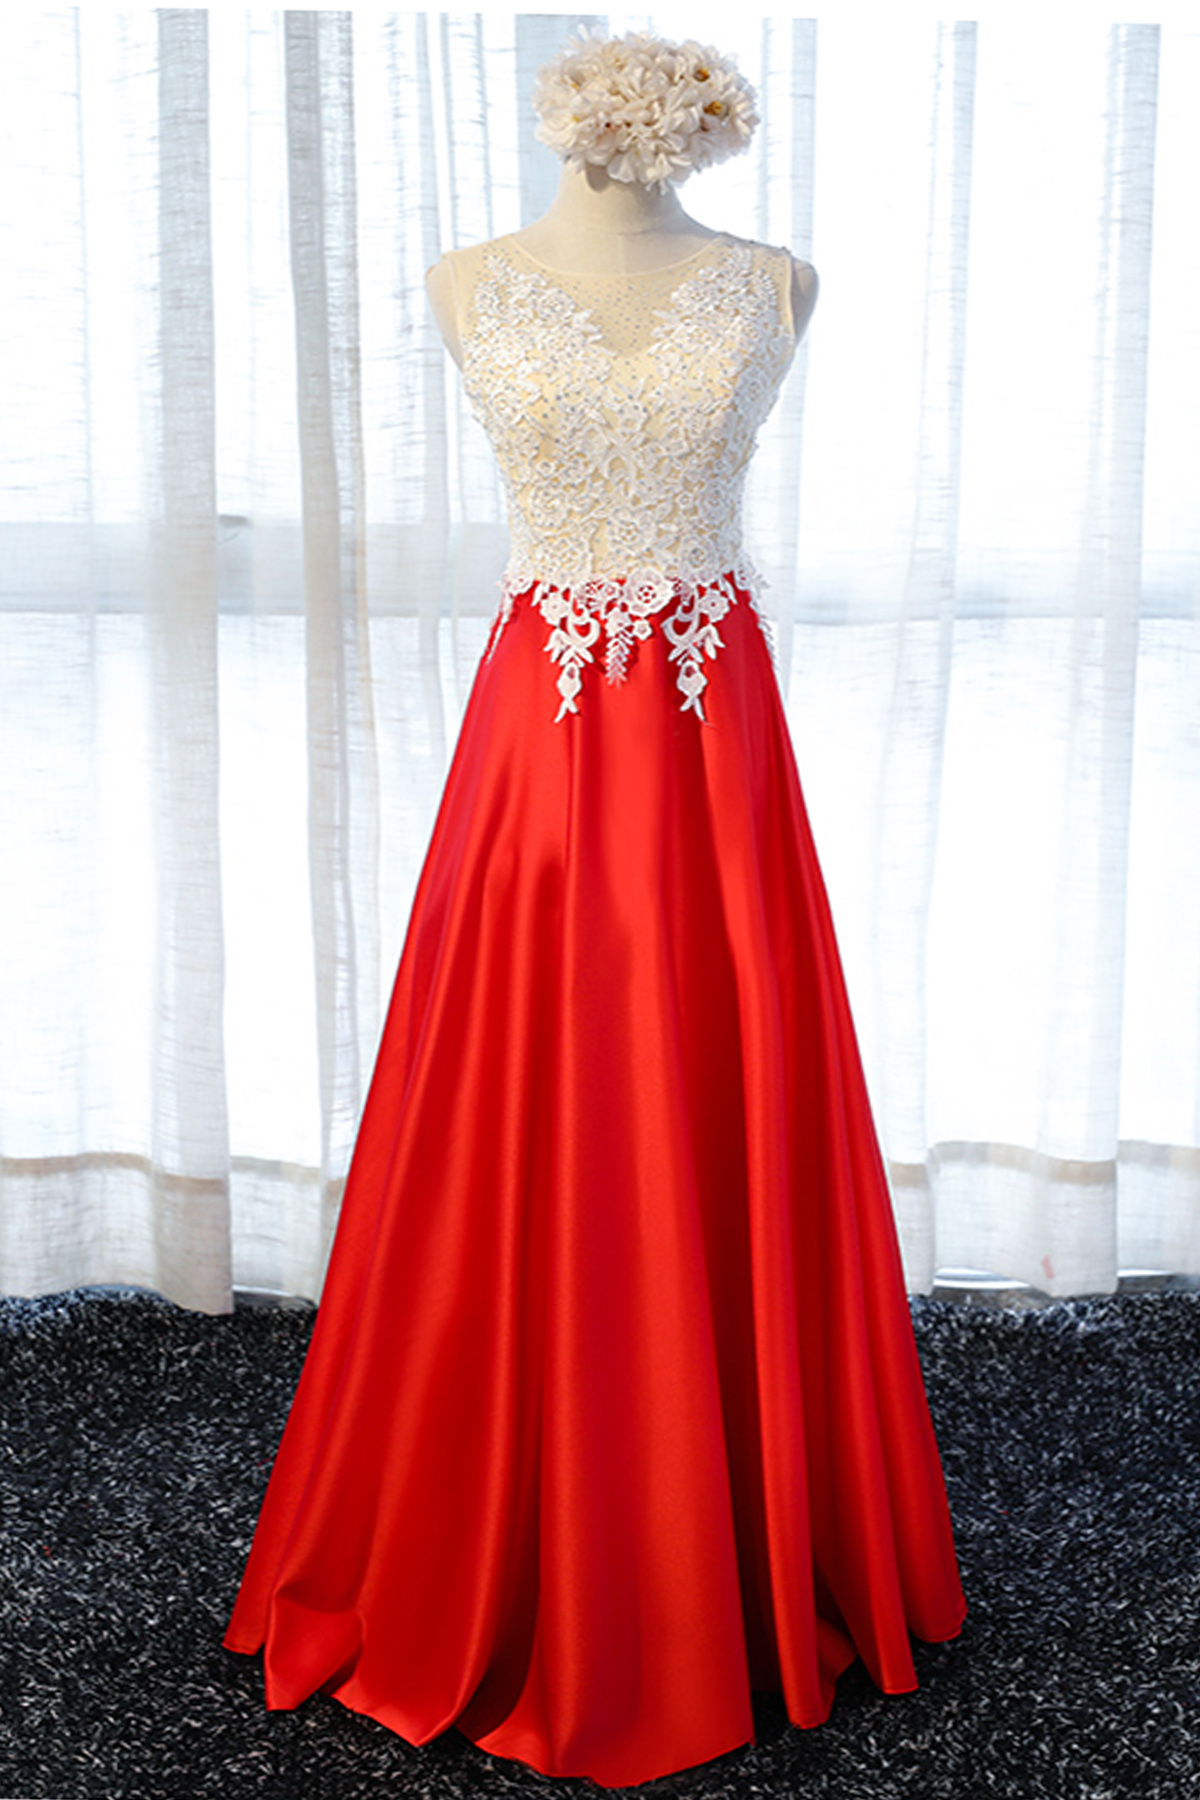 2018 Red Satin Long Lace Appliqués Prom Dress With Beading,p519